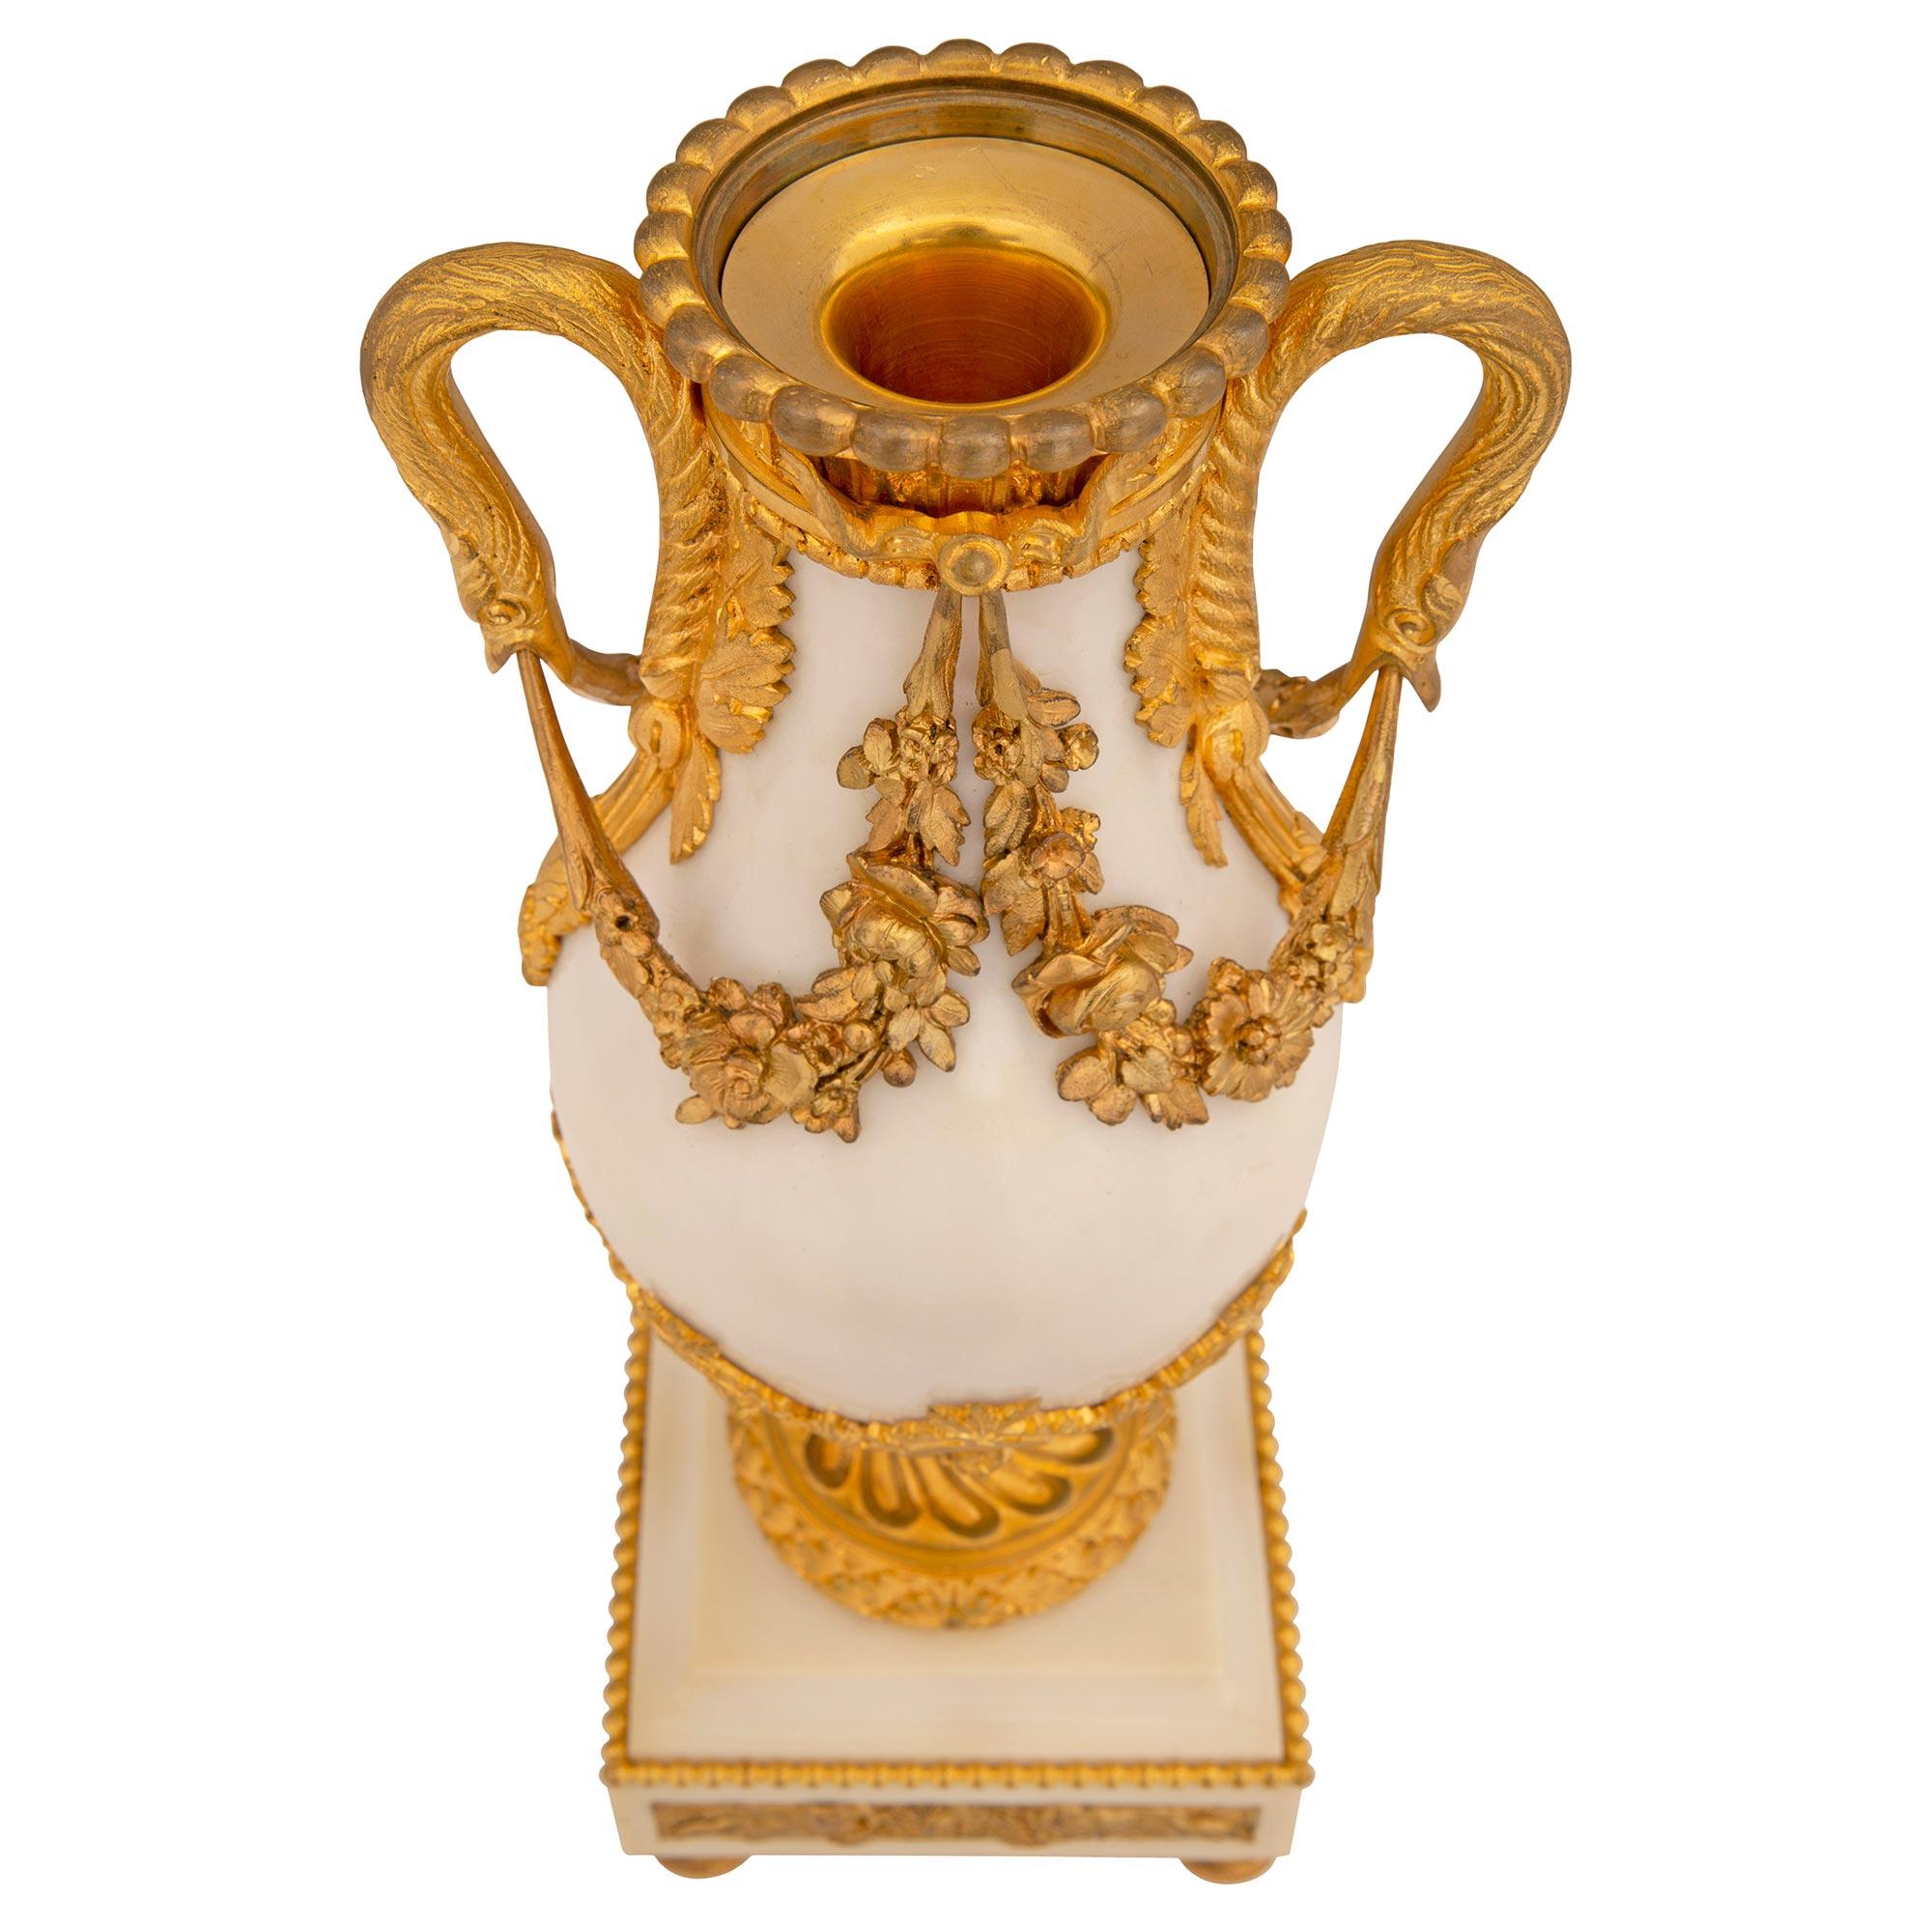 A superb pair of French 19th century Louis XVI st. white Carrara marble and ormolu cassolette urns. Each urn is raised by elegant topie shaped ormolu feet below the square white Carrara marble base decorated with a wrap around beaded band and